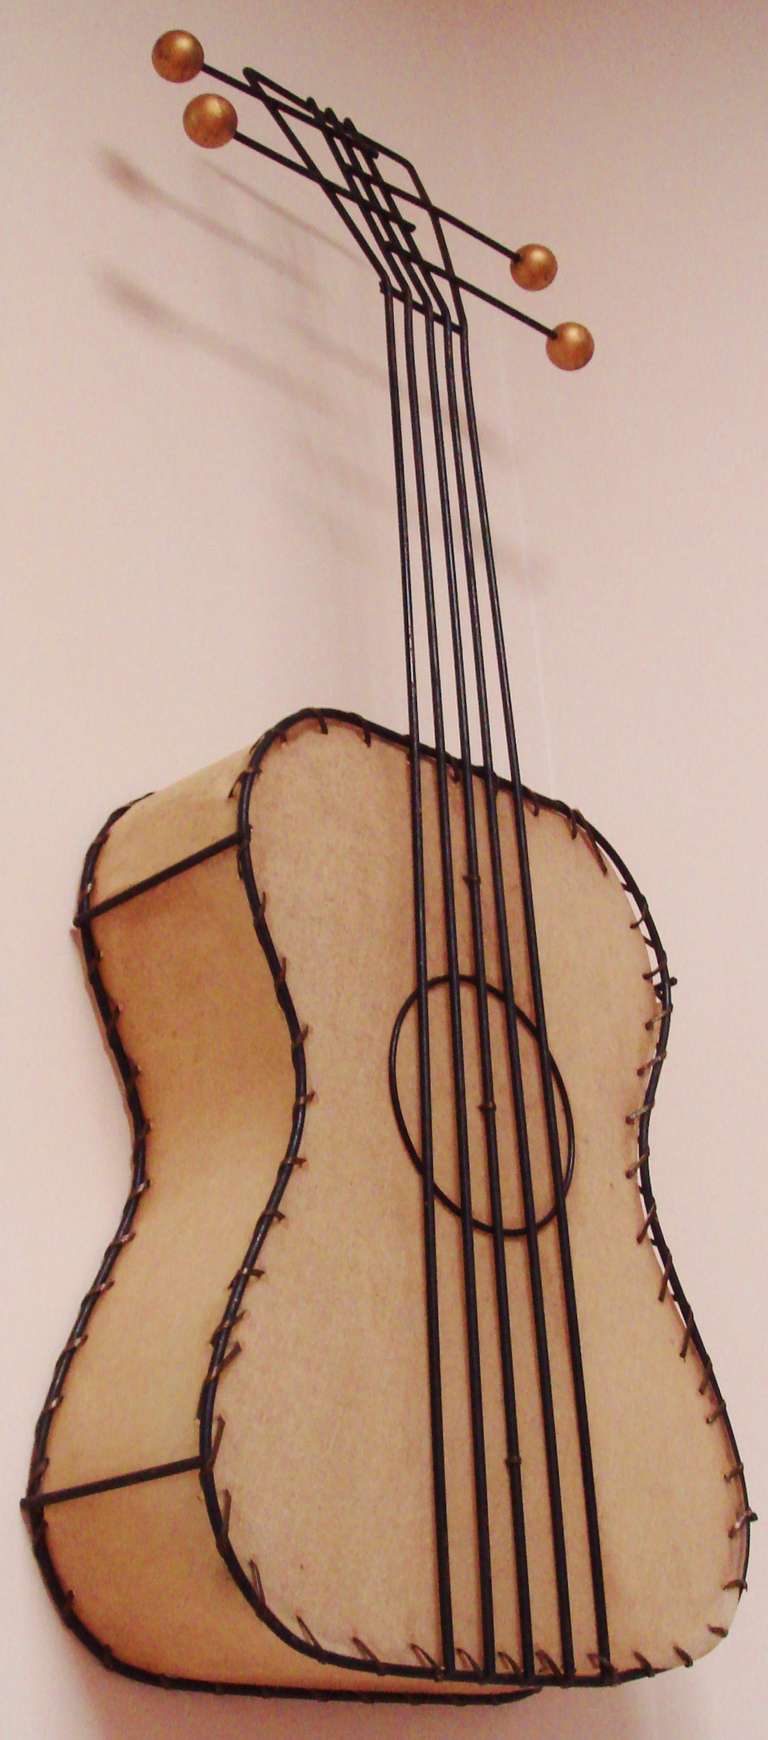 This Iconic American Mid-Century Modern figural guitar wall lamp by Frederick Weinberg is one of a series of 5-stringed instrument lamps that he created for his interior accents company, The Frederick Weinberg Company of Philadelphia. This example